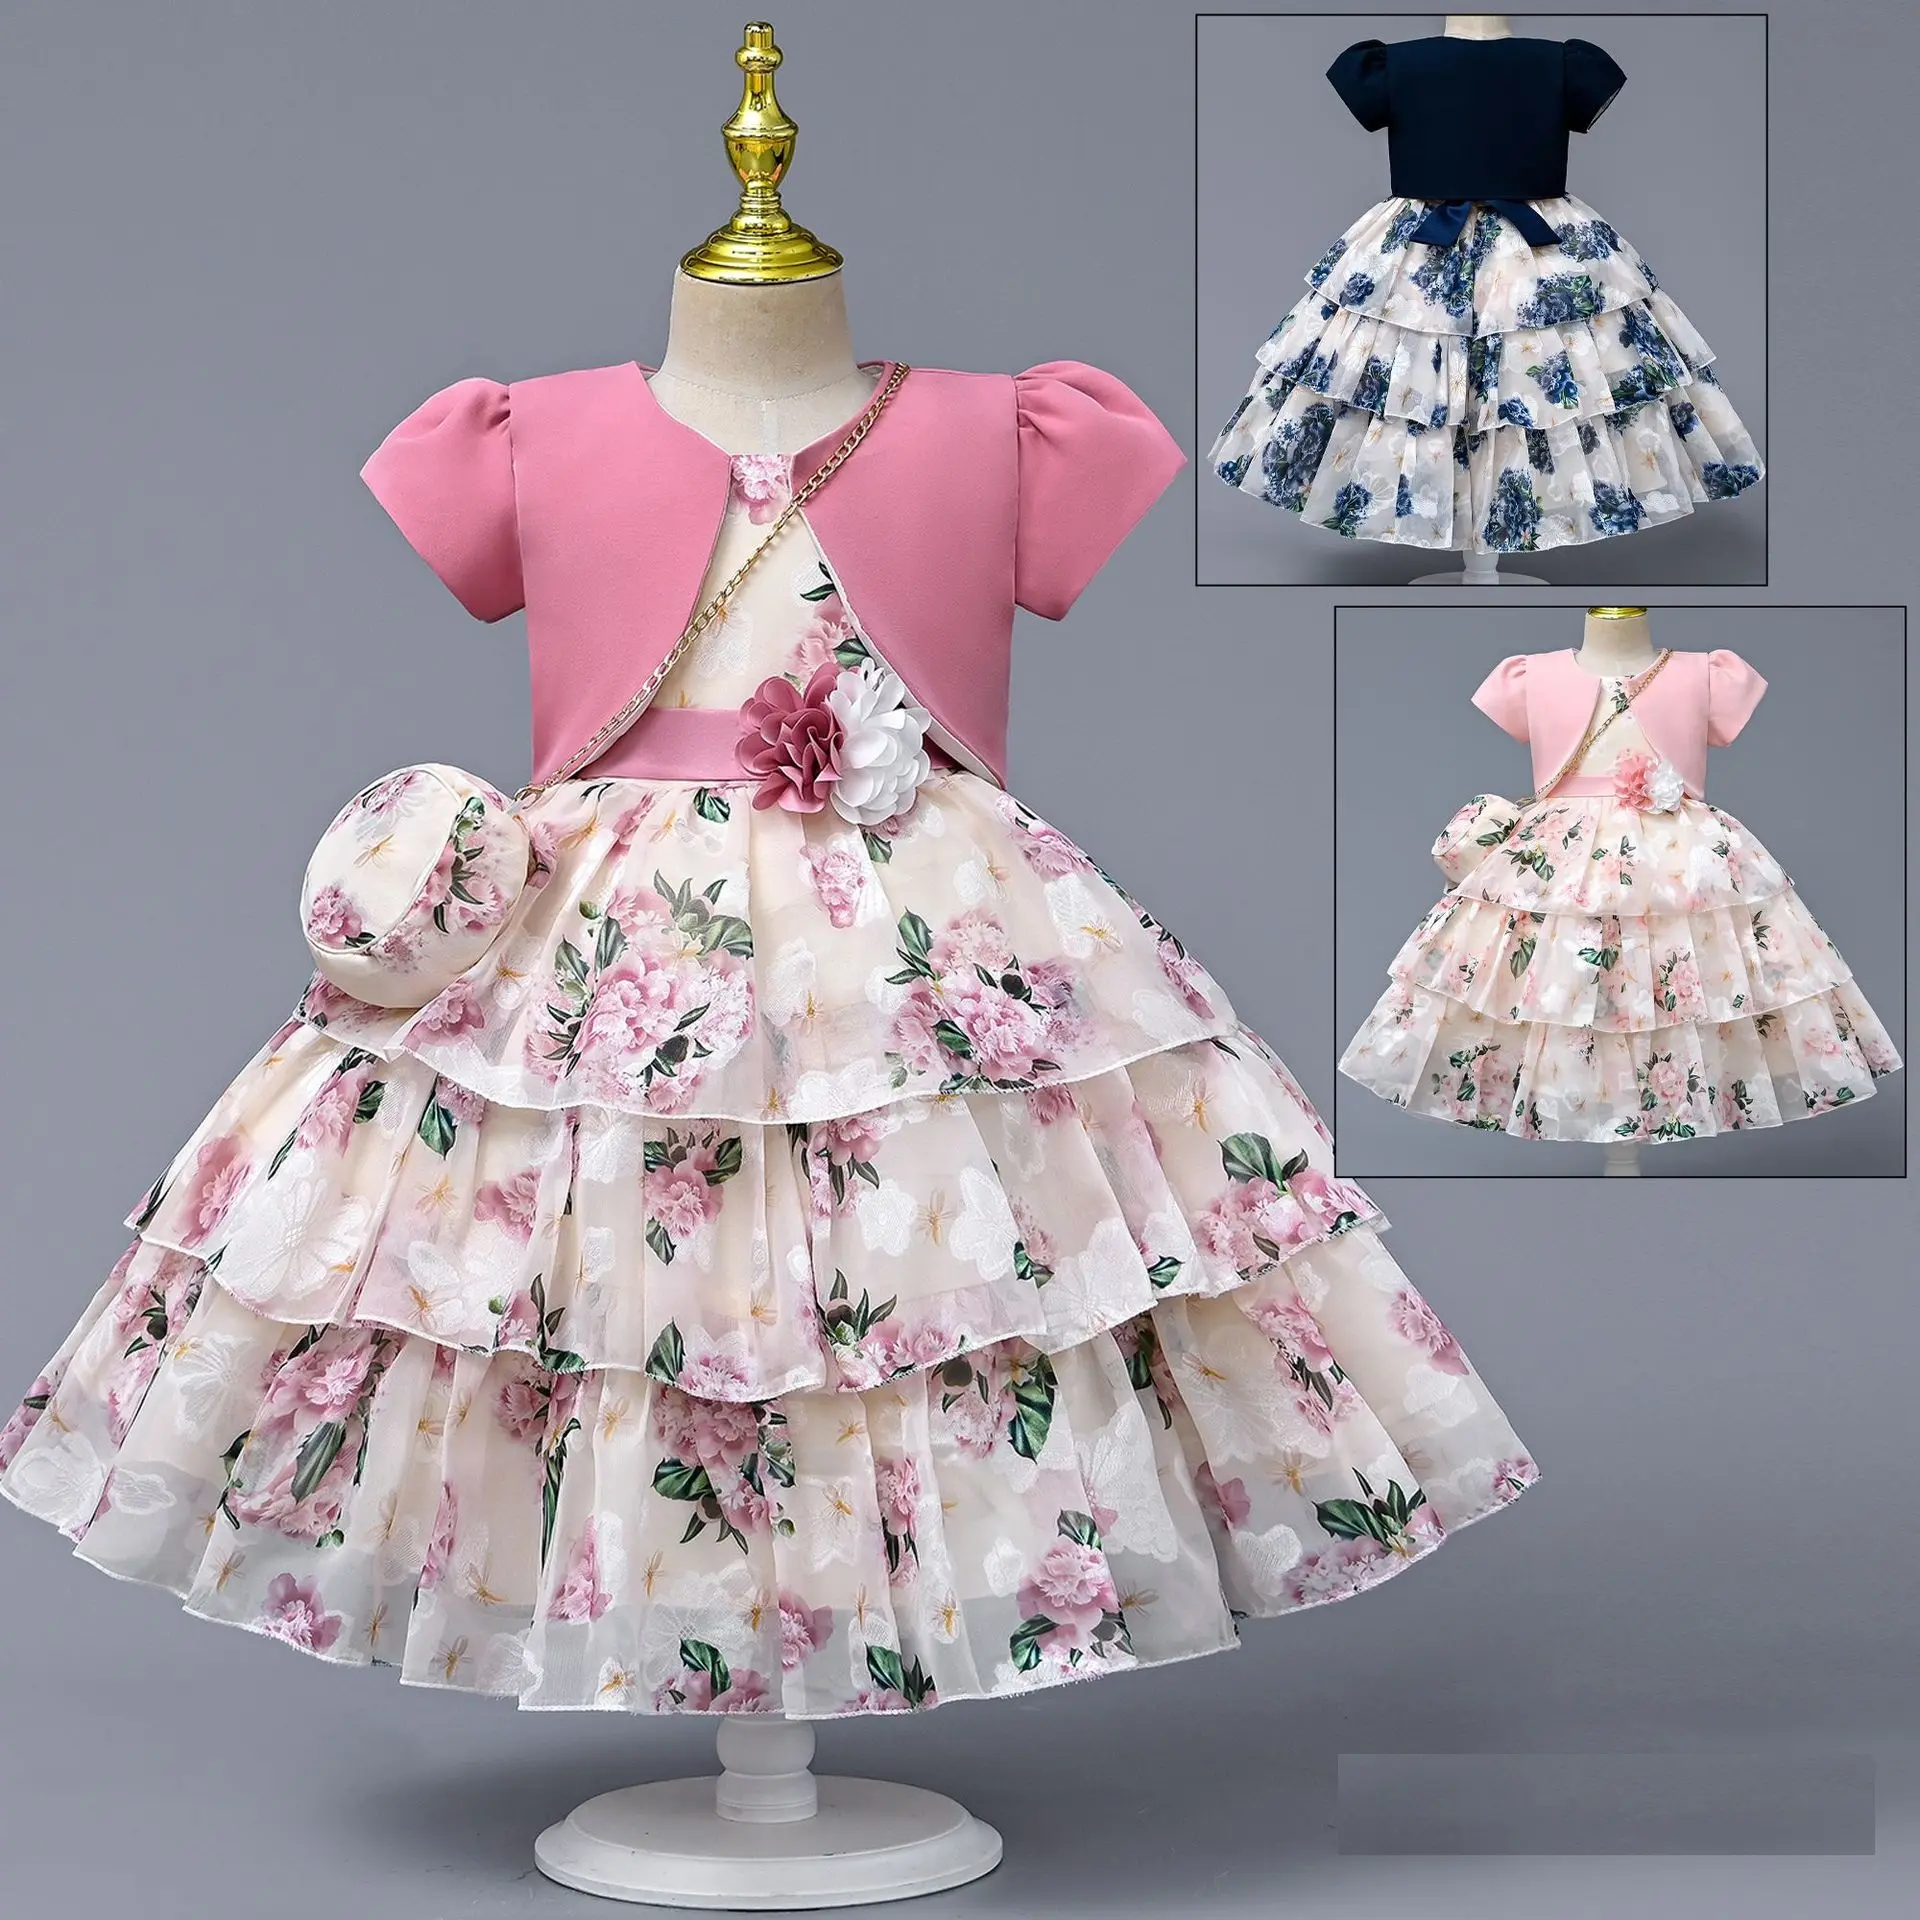 Dress+Jacket+Bag 3pcs Set High Quality Real Photo Little Girls Party Dresses Pink/Navy Floral Girl's Birthday Party Gowns